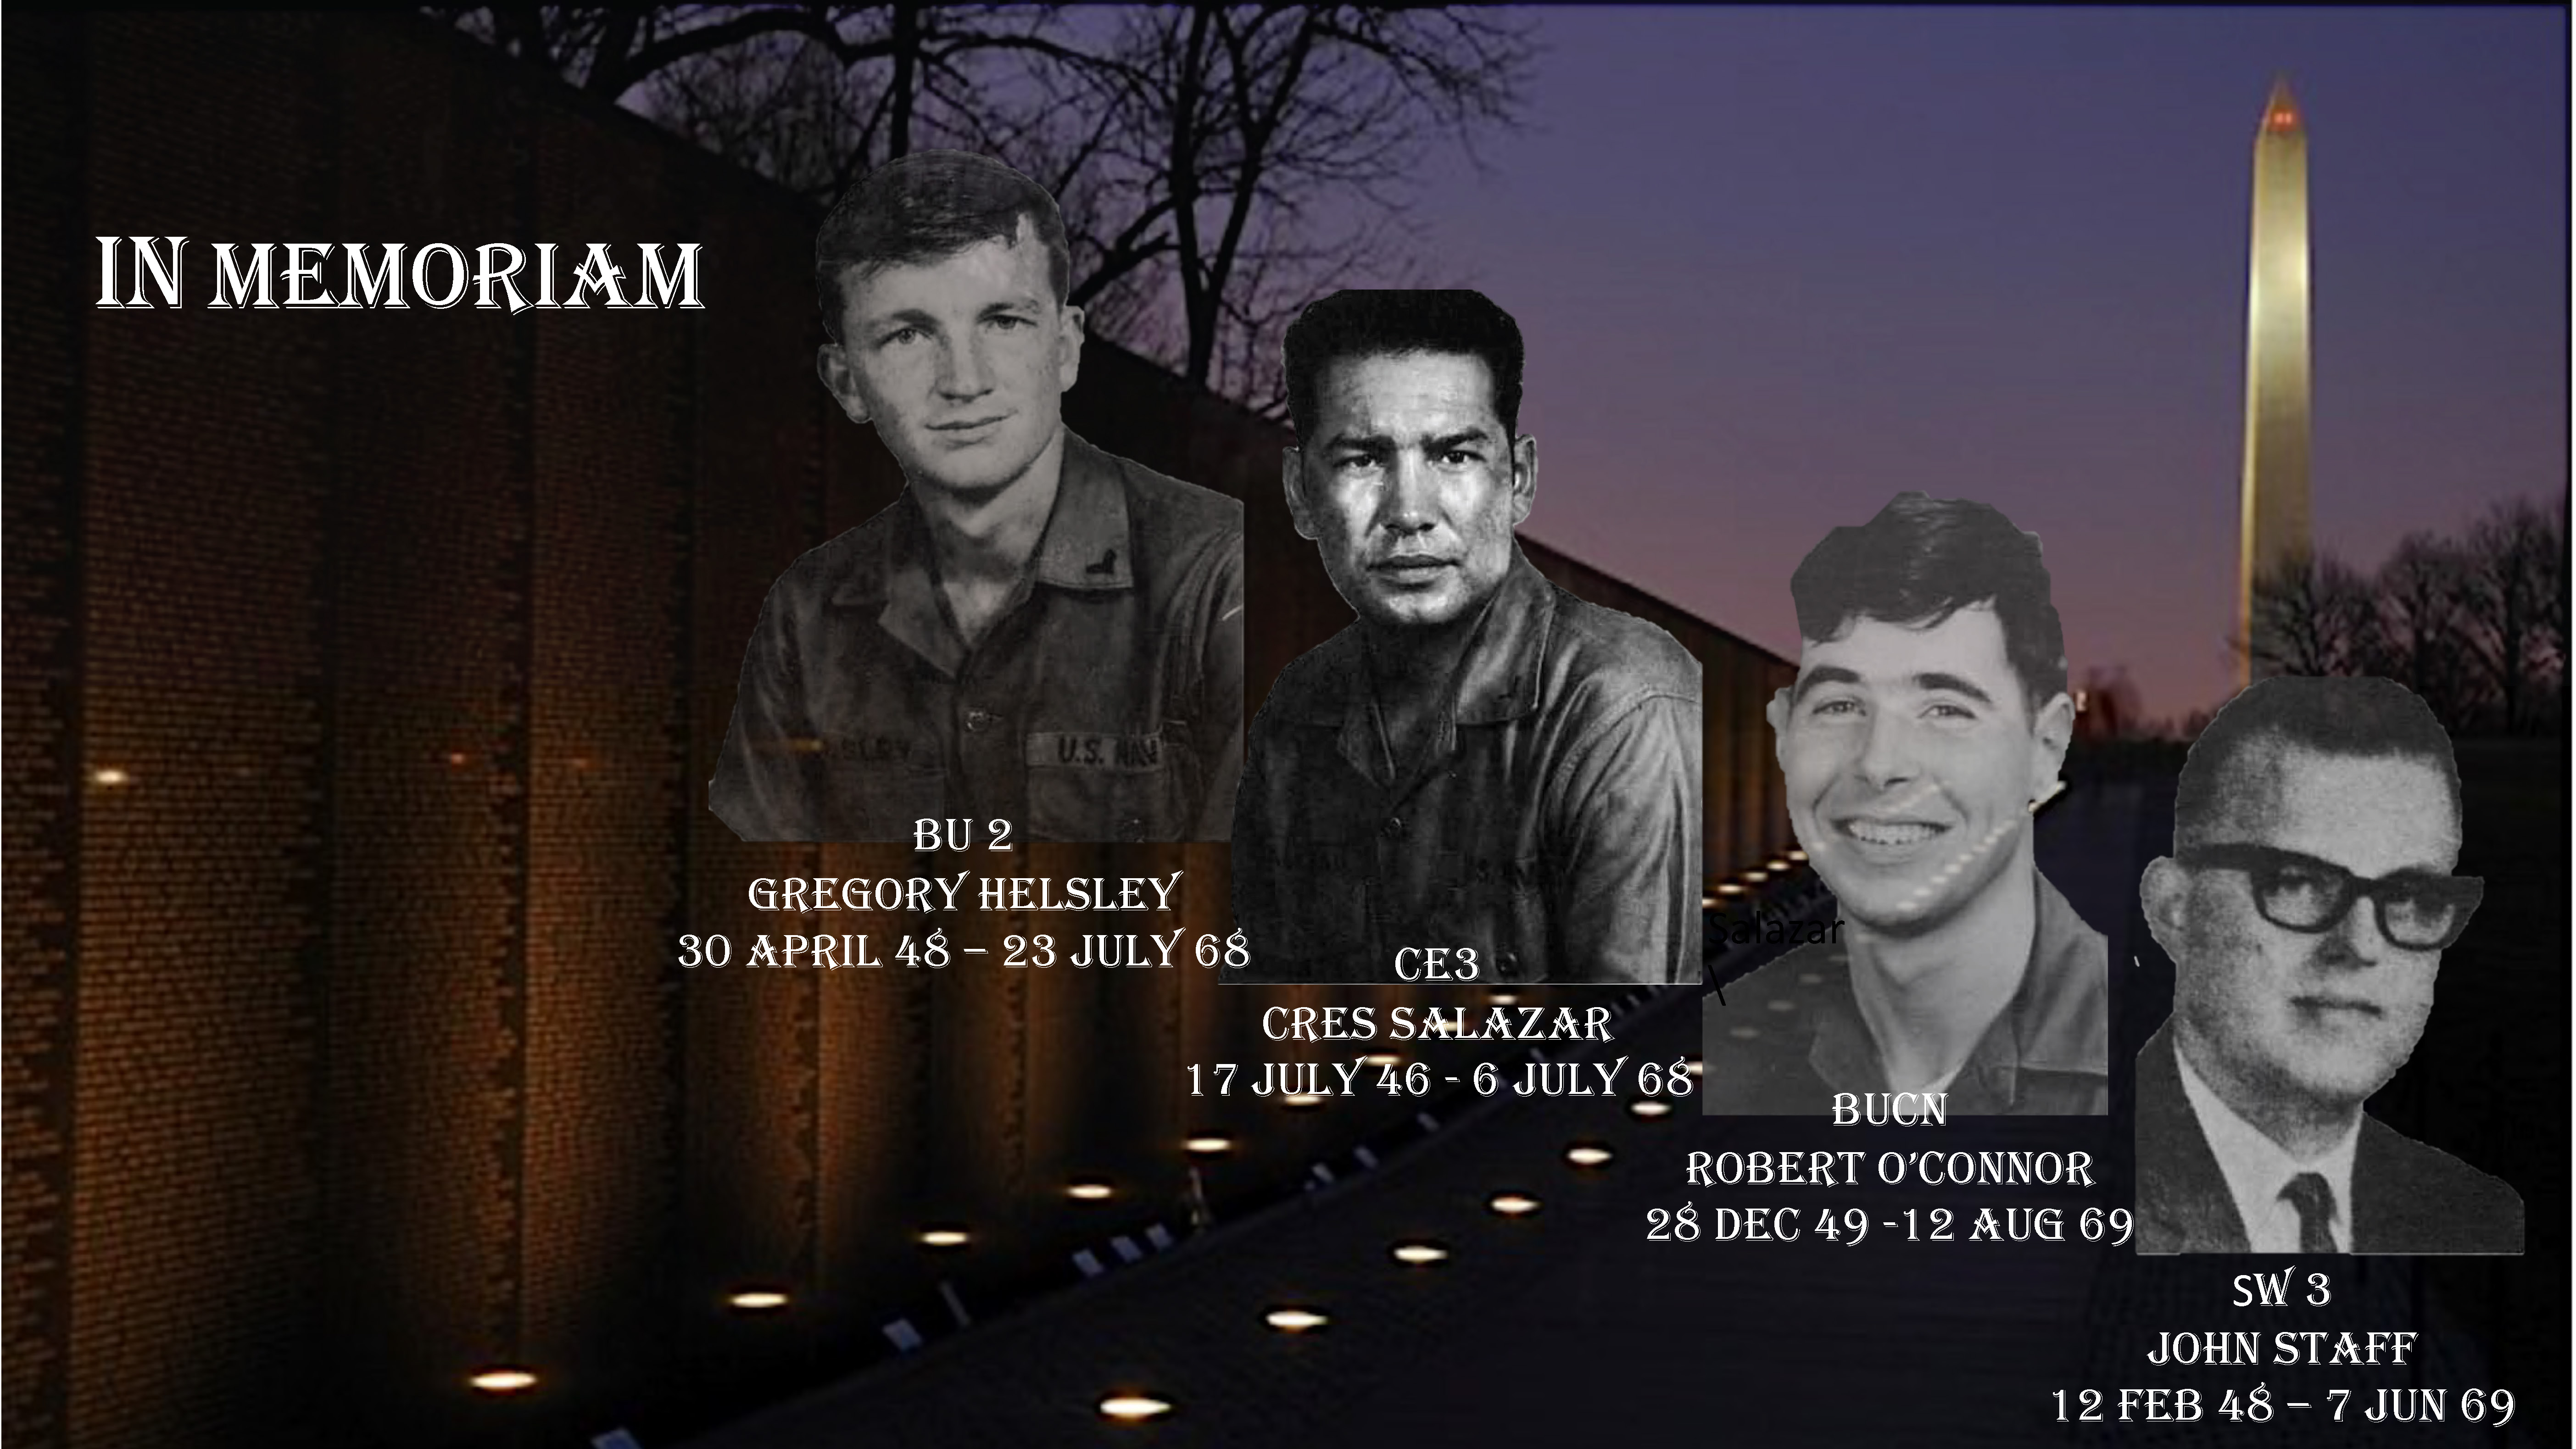 Vietnam memorial superimposed with Gregory Helsley, Cres Salazar, Robert O'Connor, and John Staff